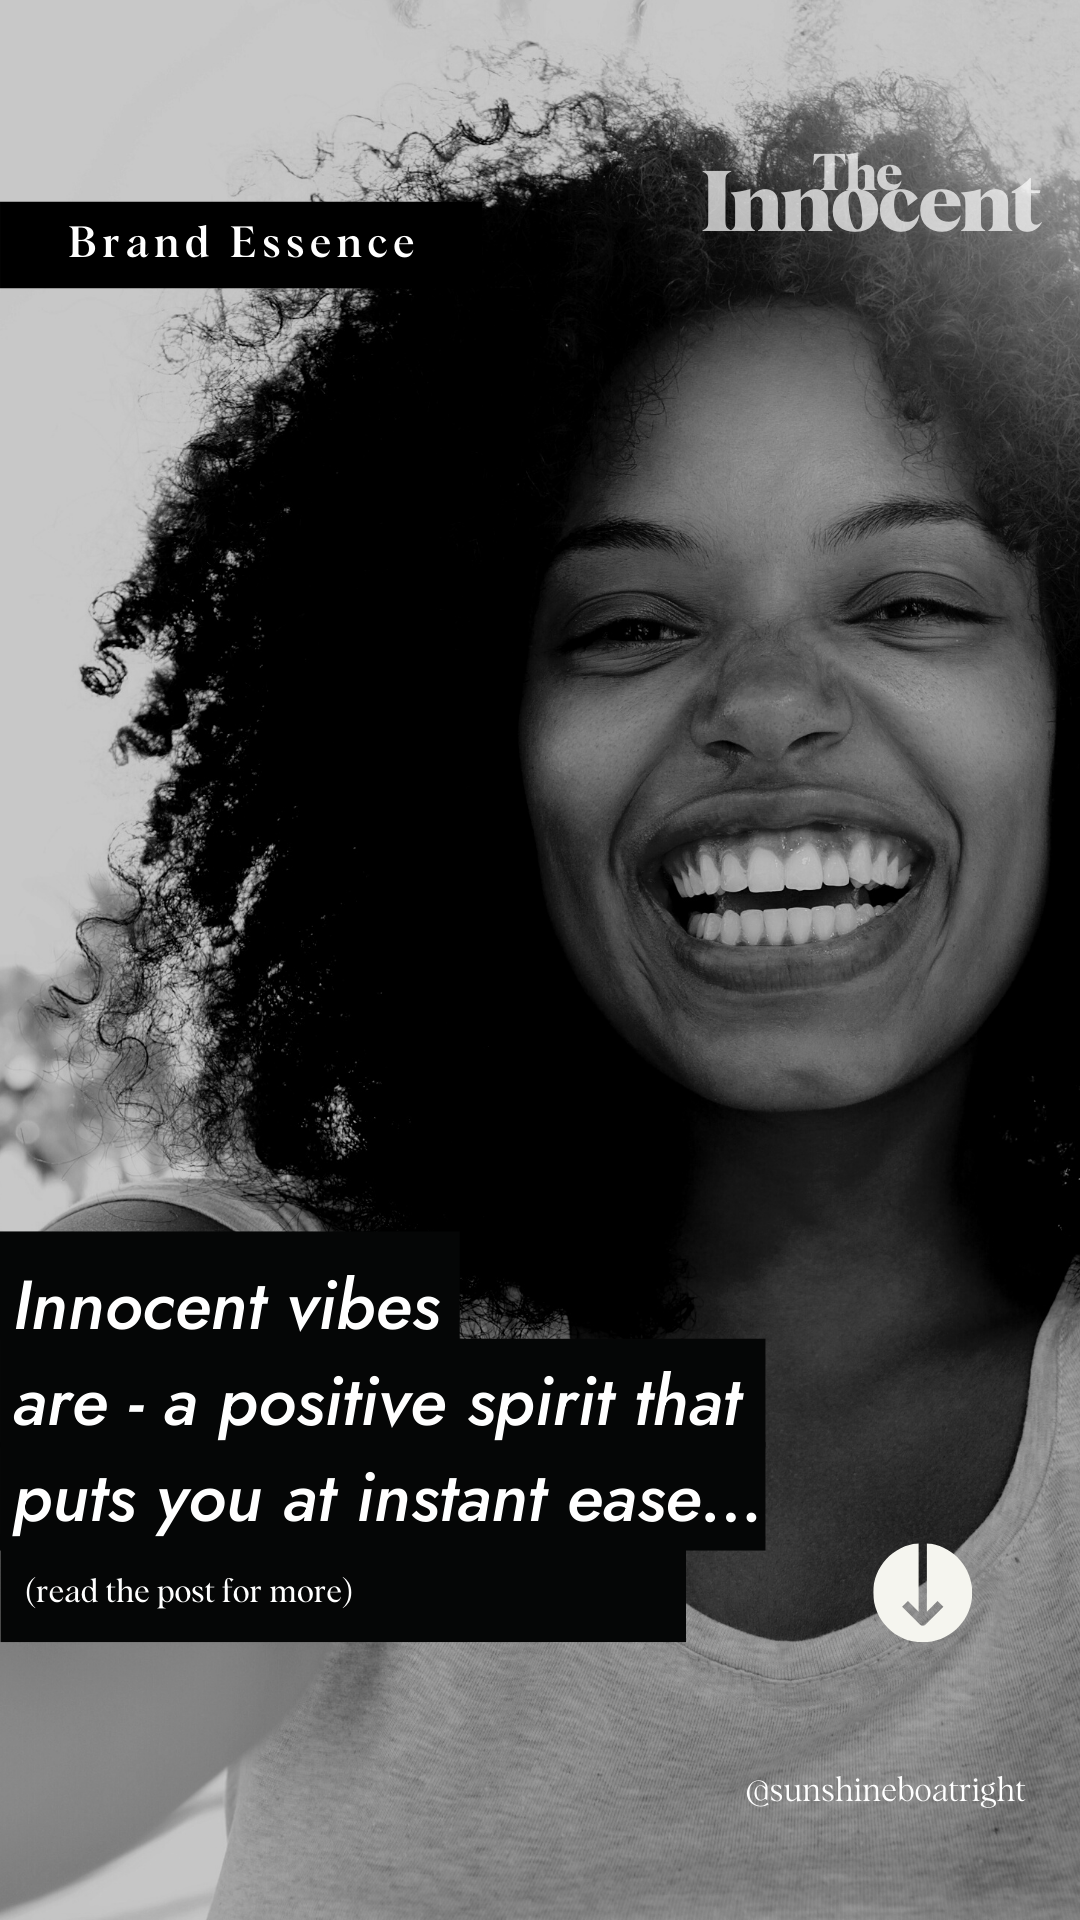 Brand Archetype Essence: Innocent vibes are a positive spirit that puts you at instant ease.